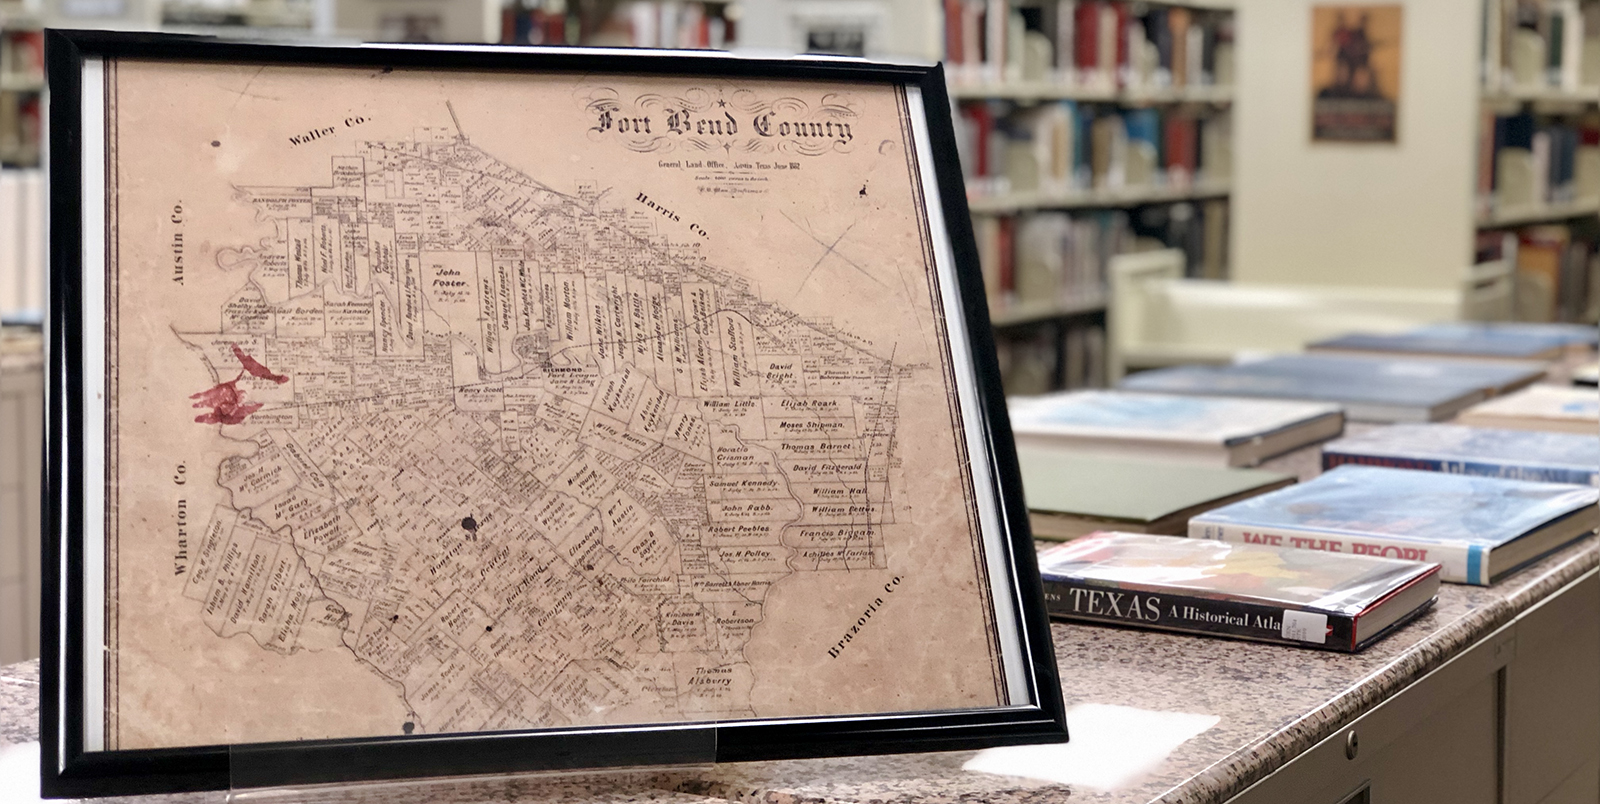 Fort Bend County framed map in the Genealogy & Local History Department